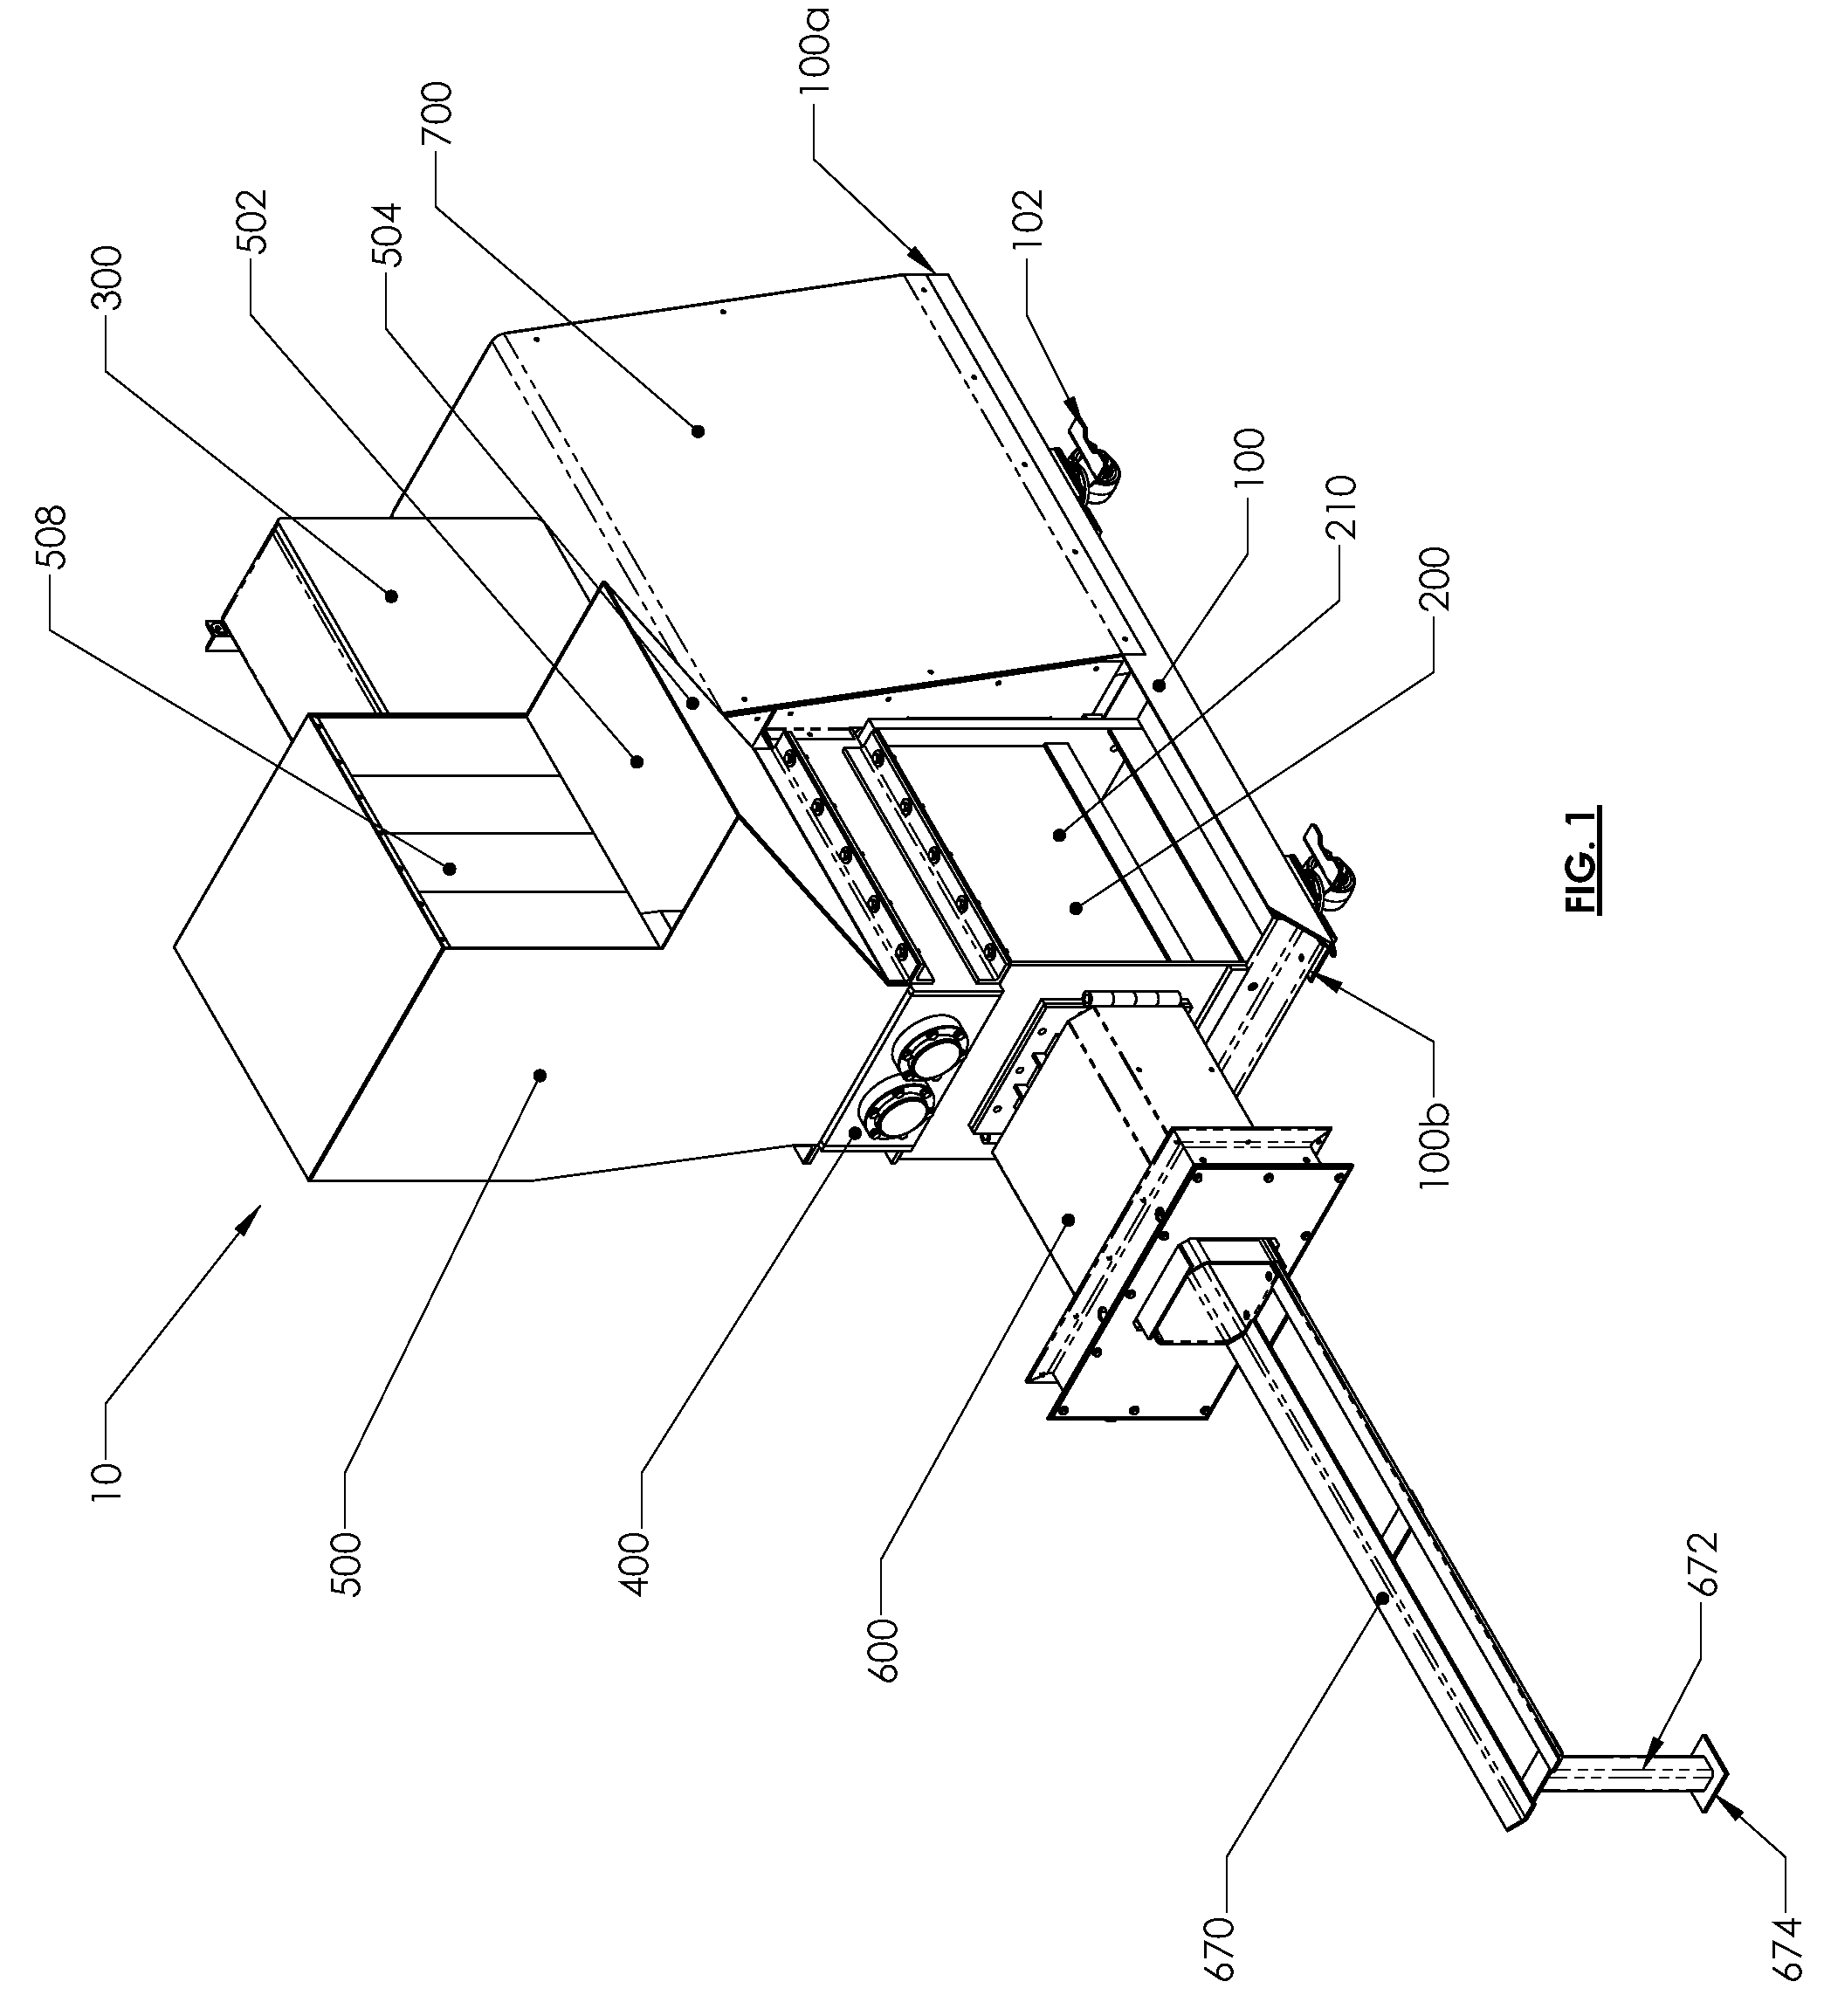 System and method for cooling a densifier